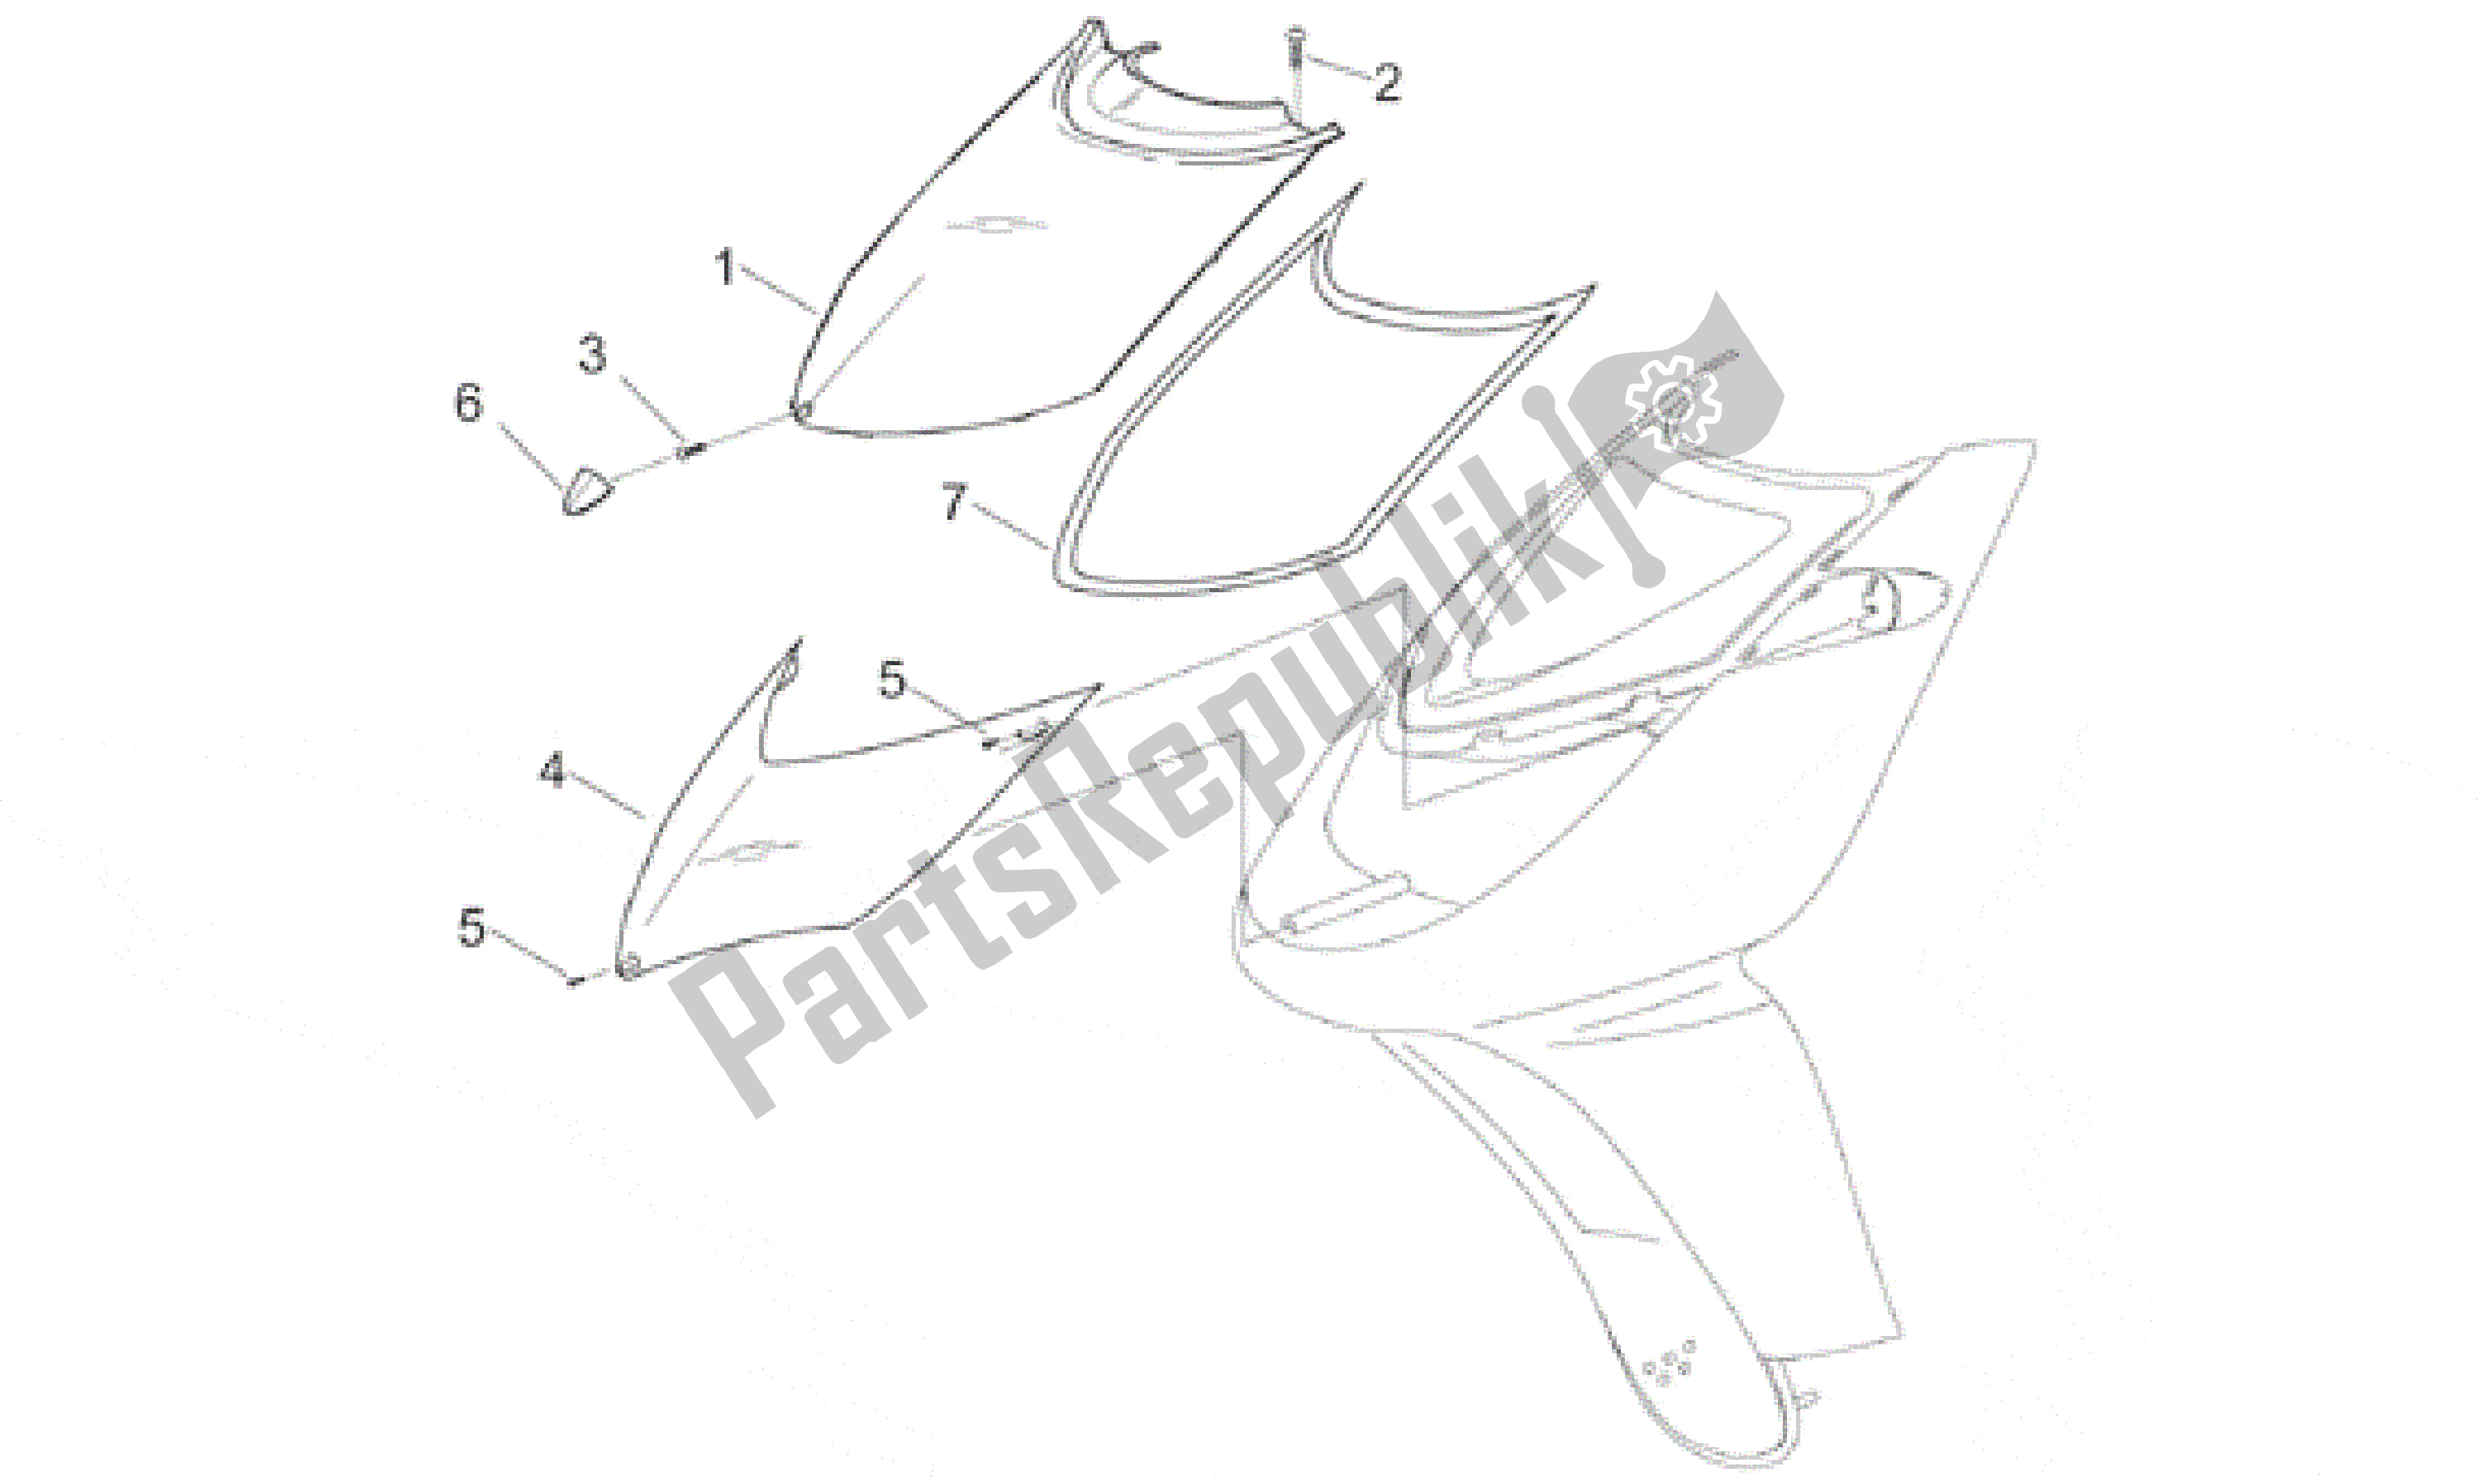 All parts for the Front Body Iii - Front Fairing of the Aprilia Sonic 50 1998 - 2001